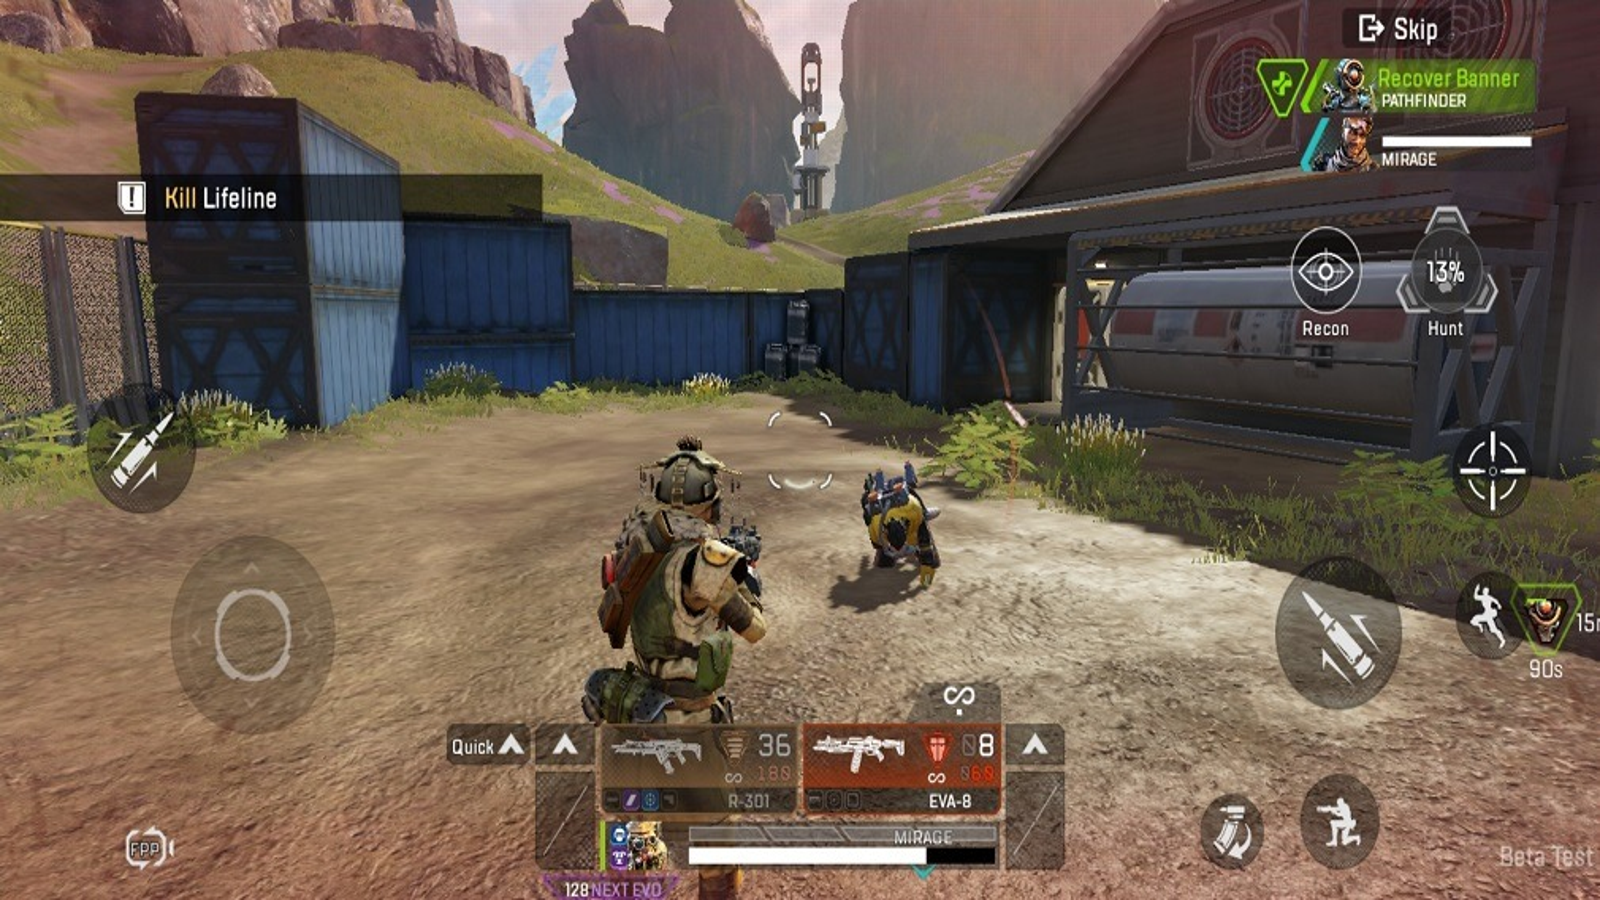 apex legends mobile: Apex Legend is now available on mobile